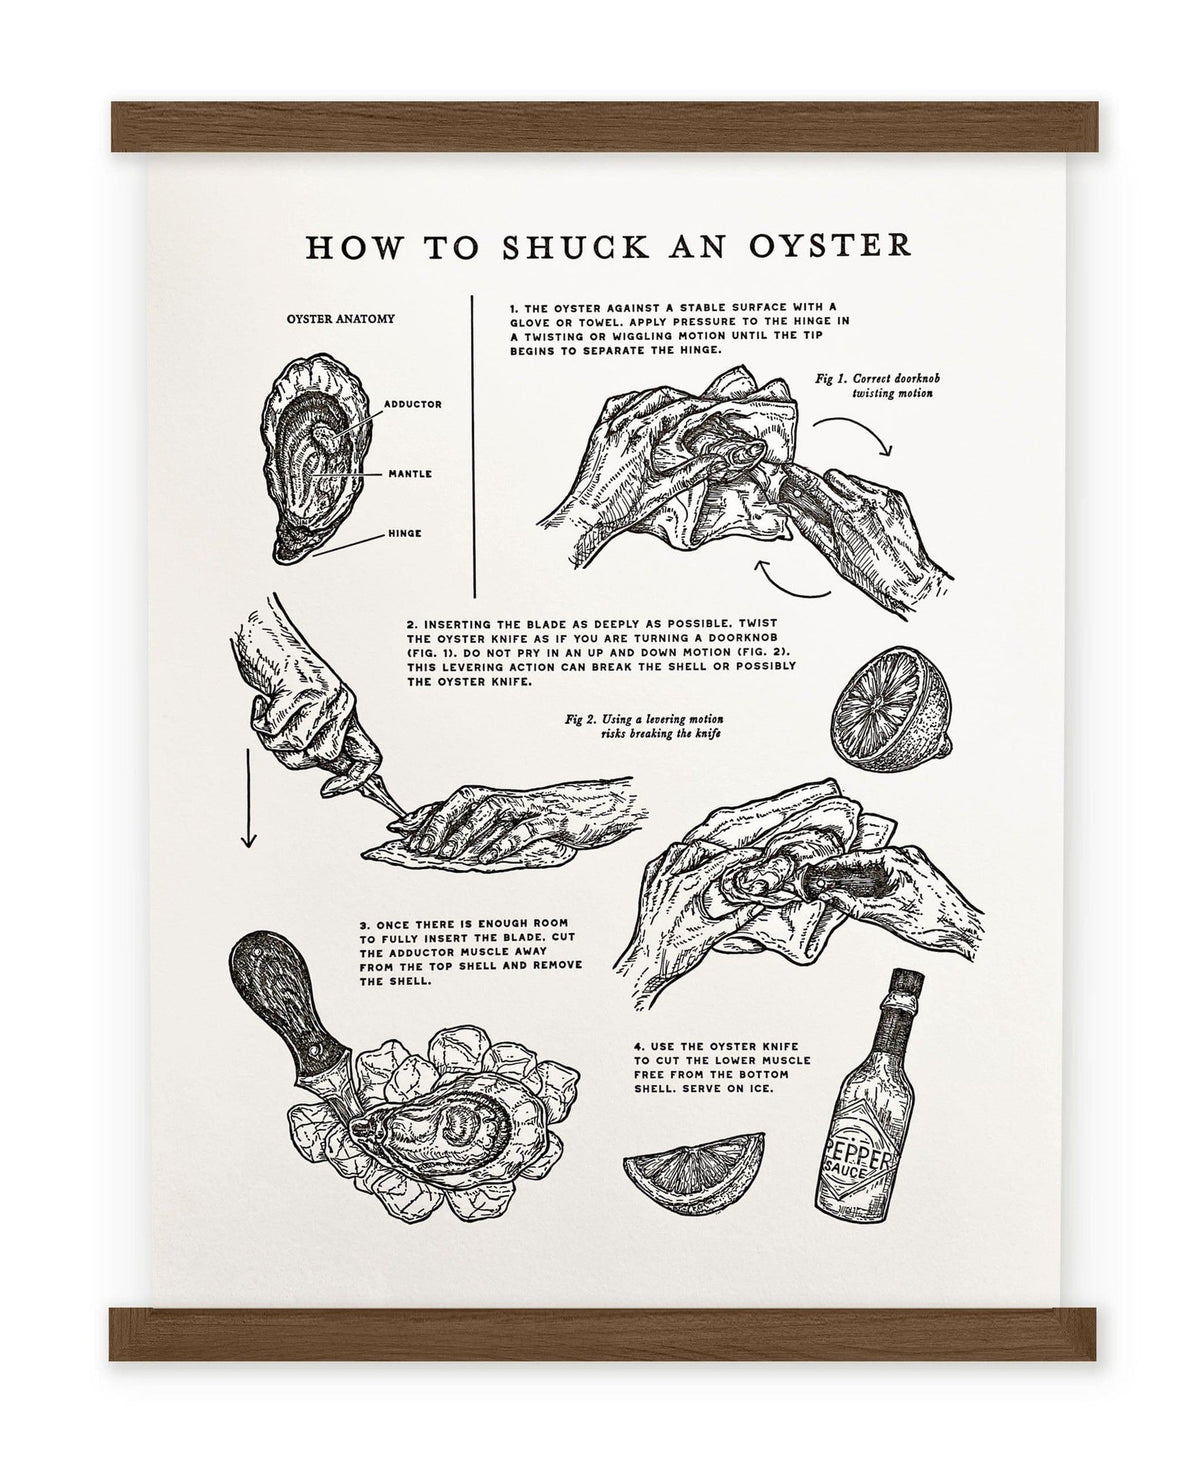 A poster with instructions and pictures of oysters: The Wild Wander Oyster Shucking Guide Letterpress Print.